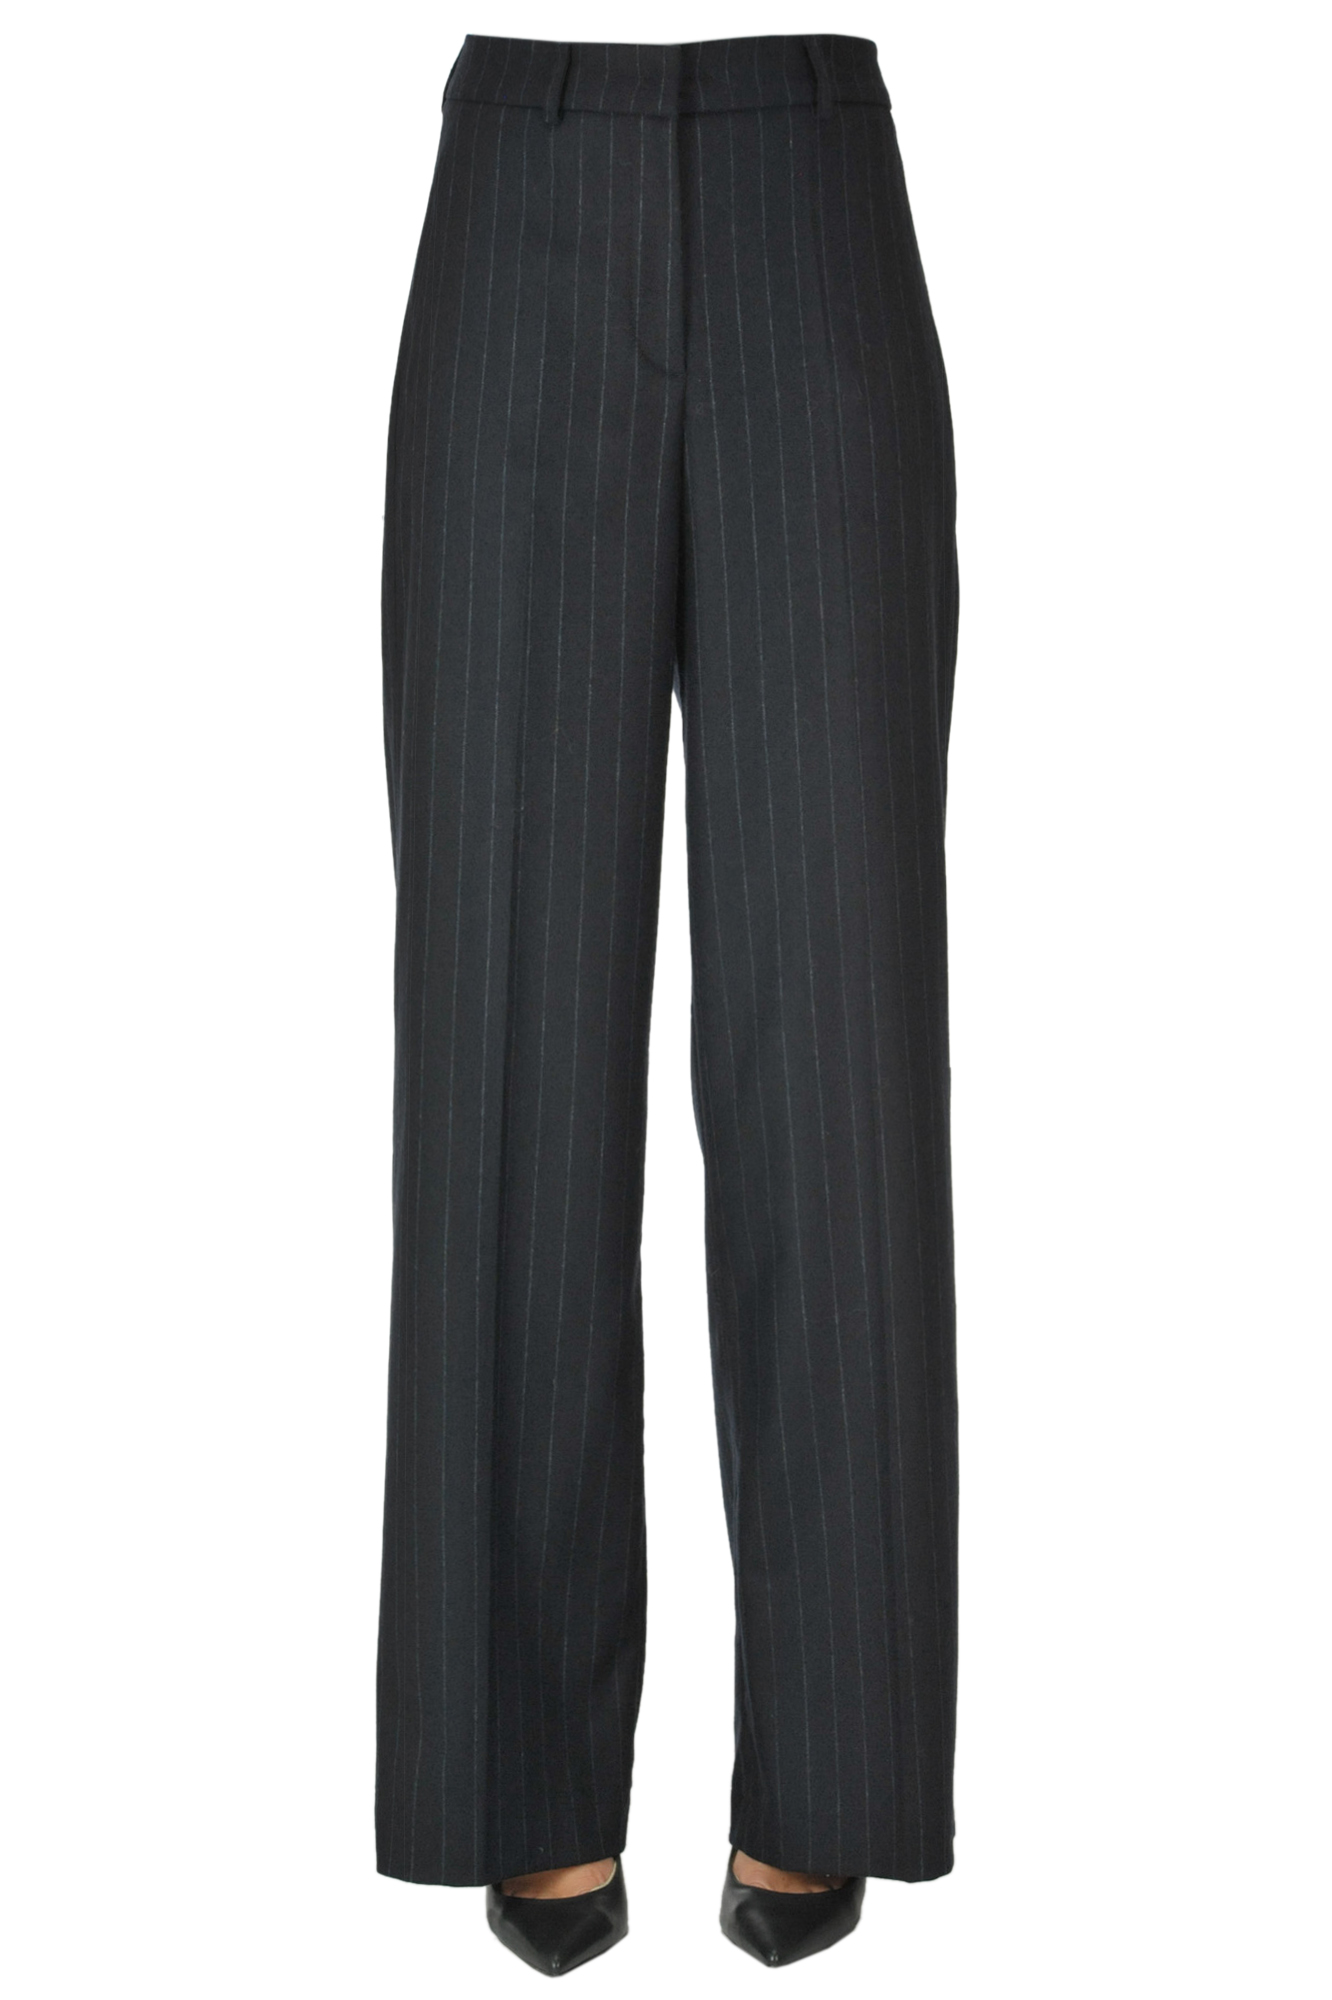 I.c.f. Pinstriped Trousers In Navy Blue